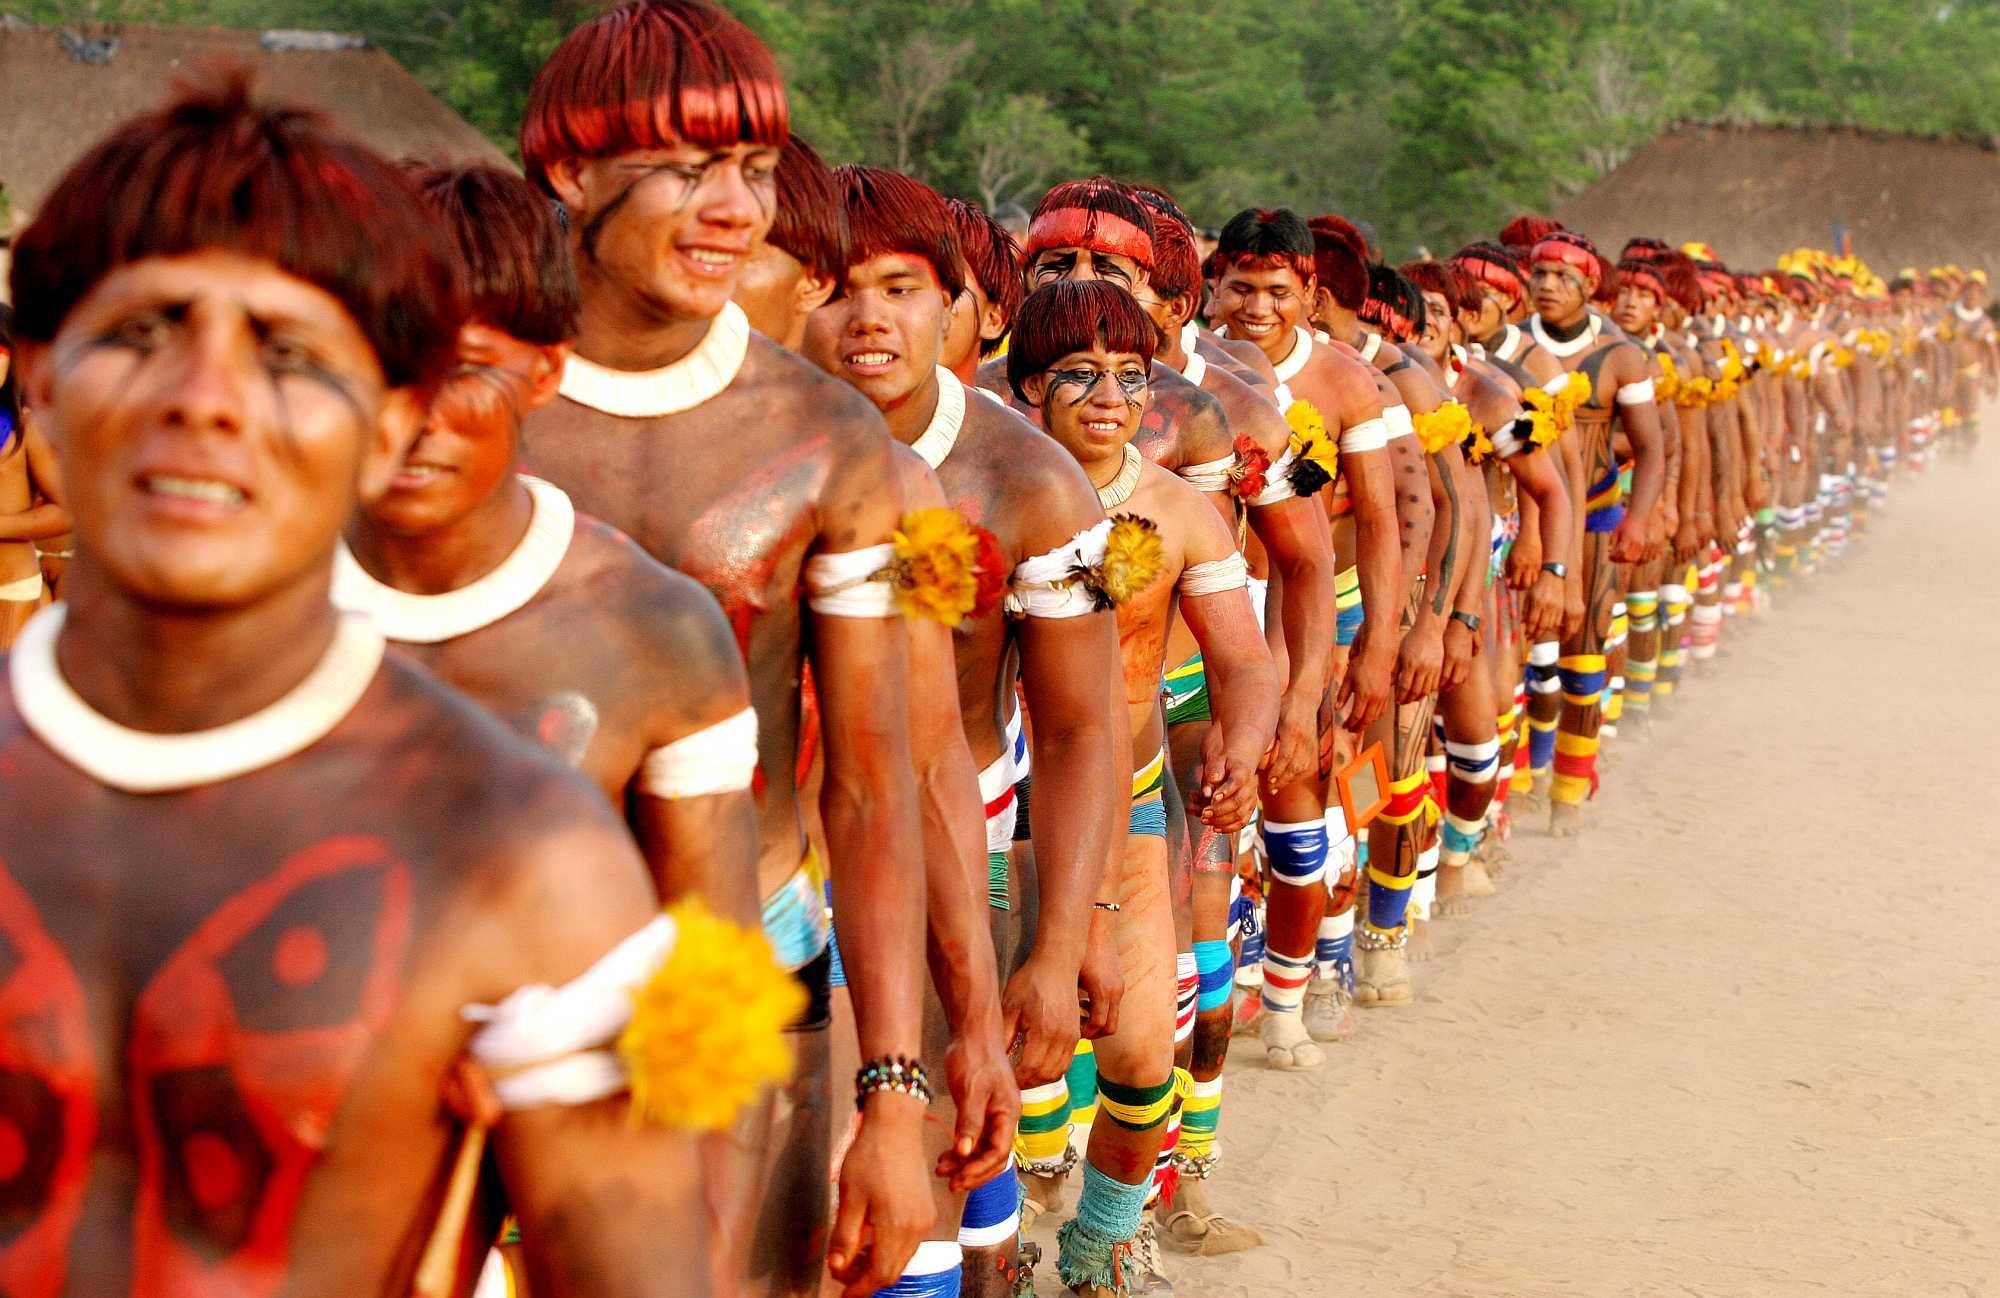 Brazilian Indians from the Xingu Park, in the Amazon, celebrating the Kuarup festival